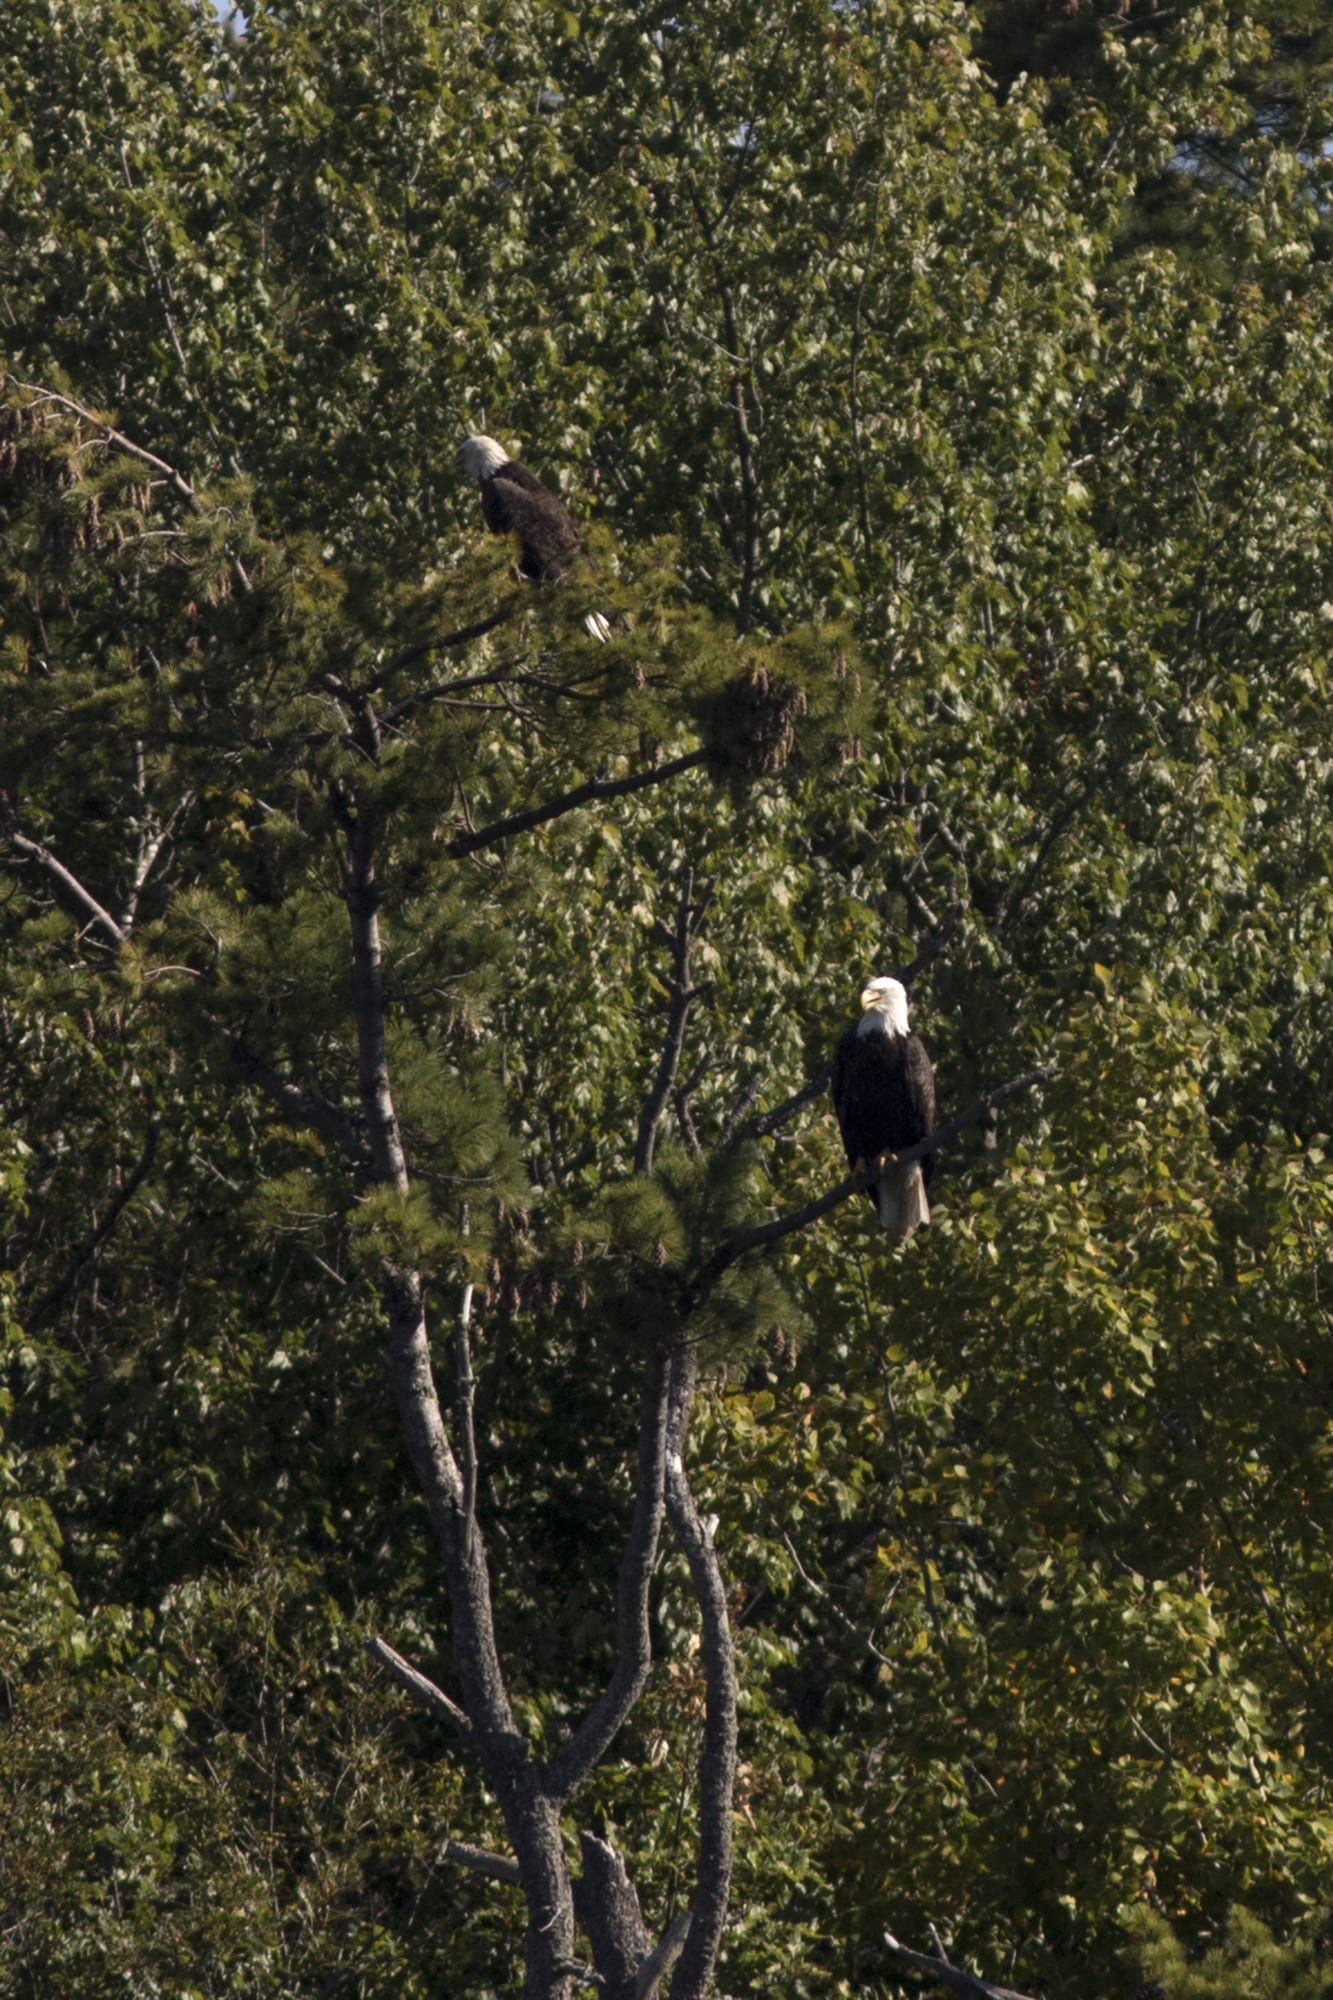 Two adult Bald Eagles in a tree along the Kennebec River.